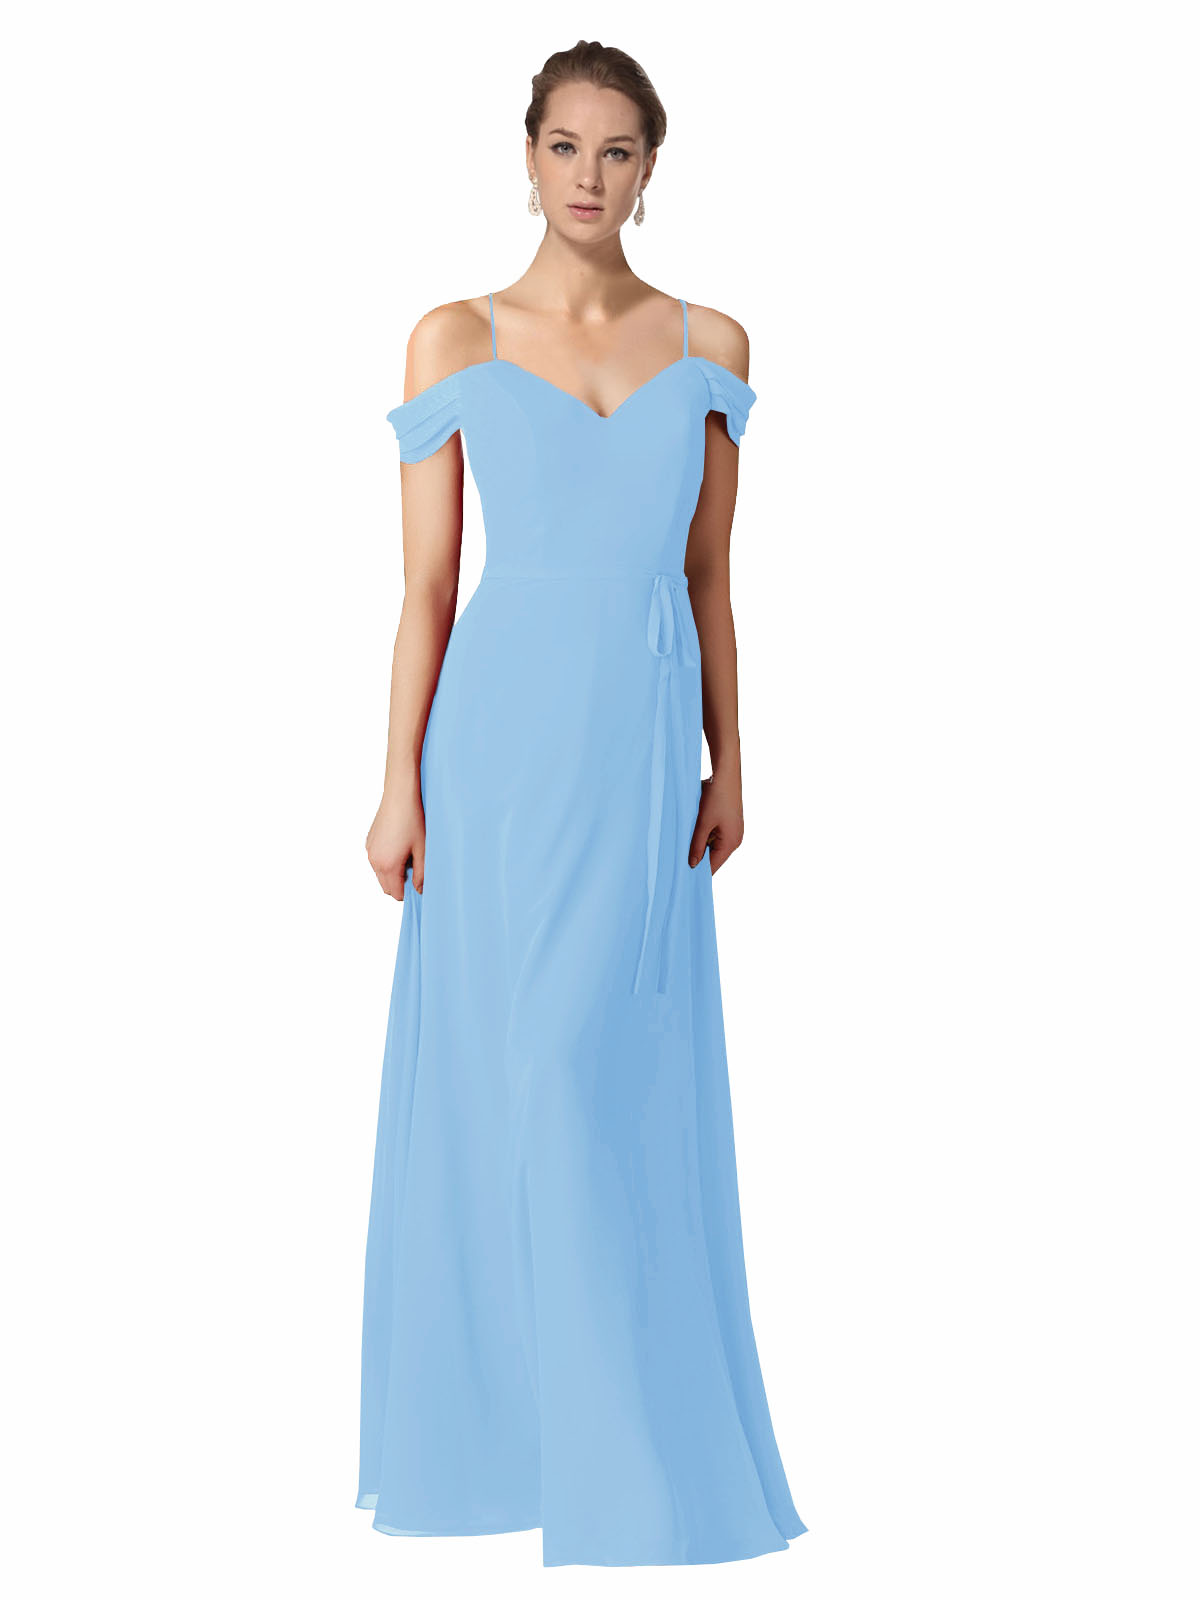 Periwinkle A-Line Sweetheart Off the Shoulder Long Bridesmaid Dress Alyssa